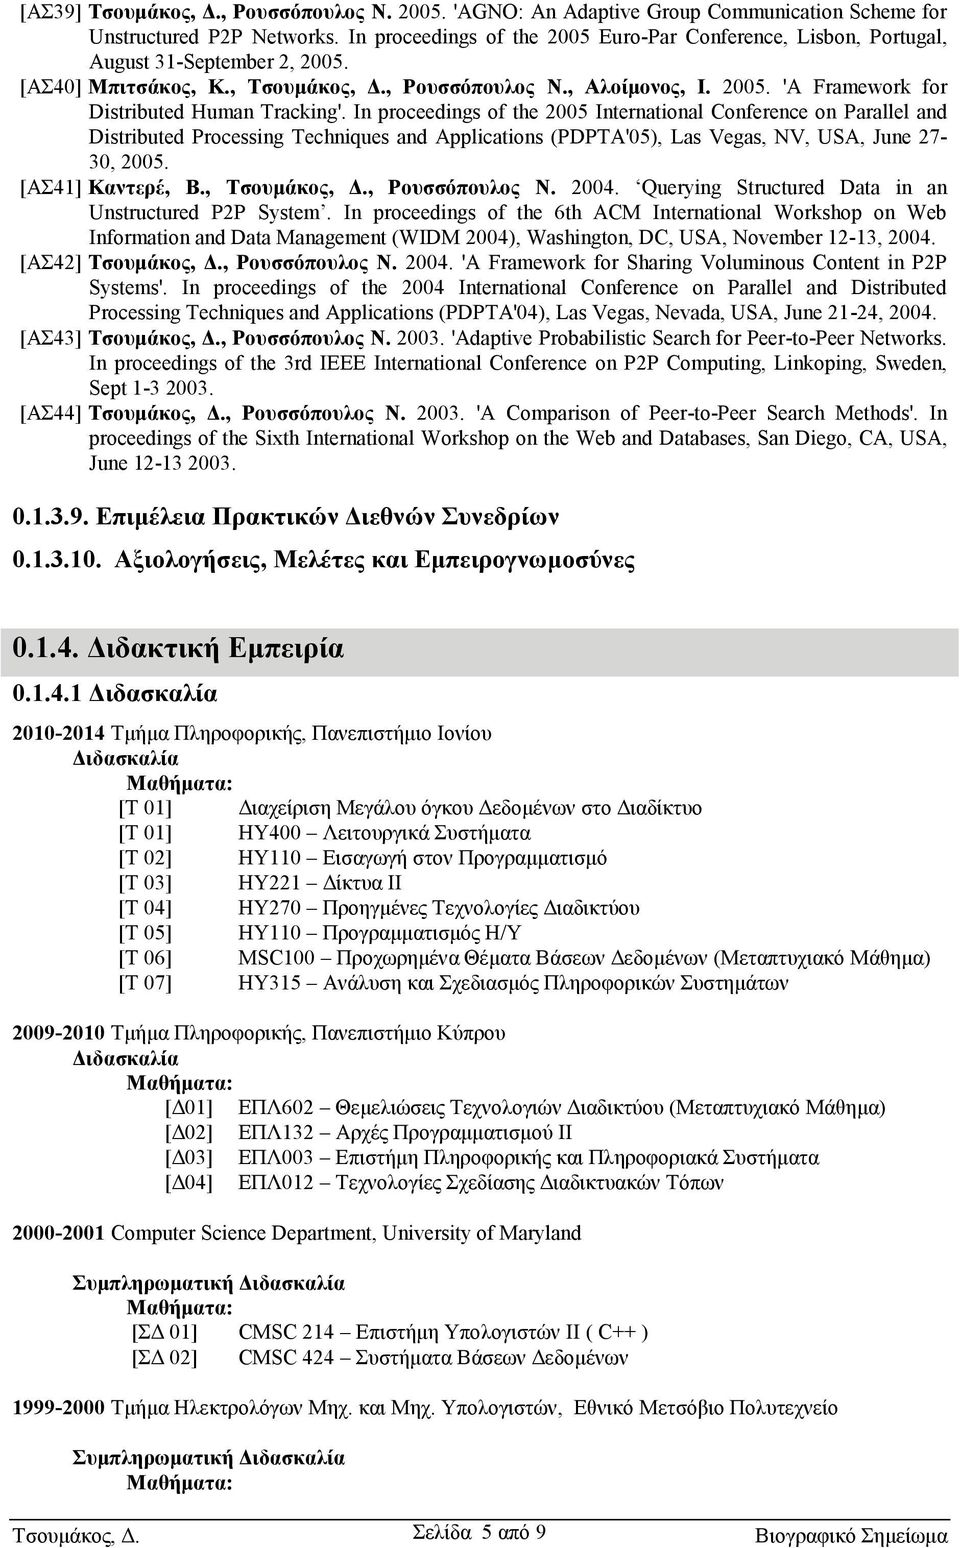 In proceedings of the 2005 International Conference on Parallel and Distributed Processing Techniques and Applications (PDPTA'05), Las Vegas, NV, USA, June 27-30, 2005. [ΑΣ41] Καντερέ, Β.